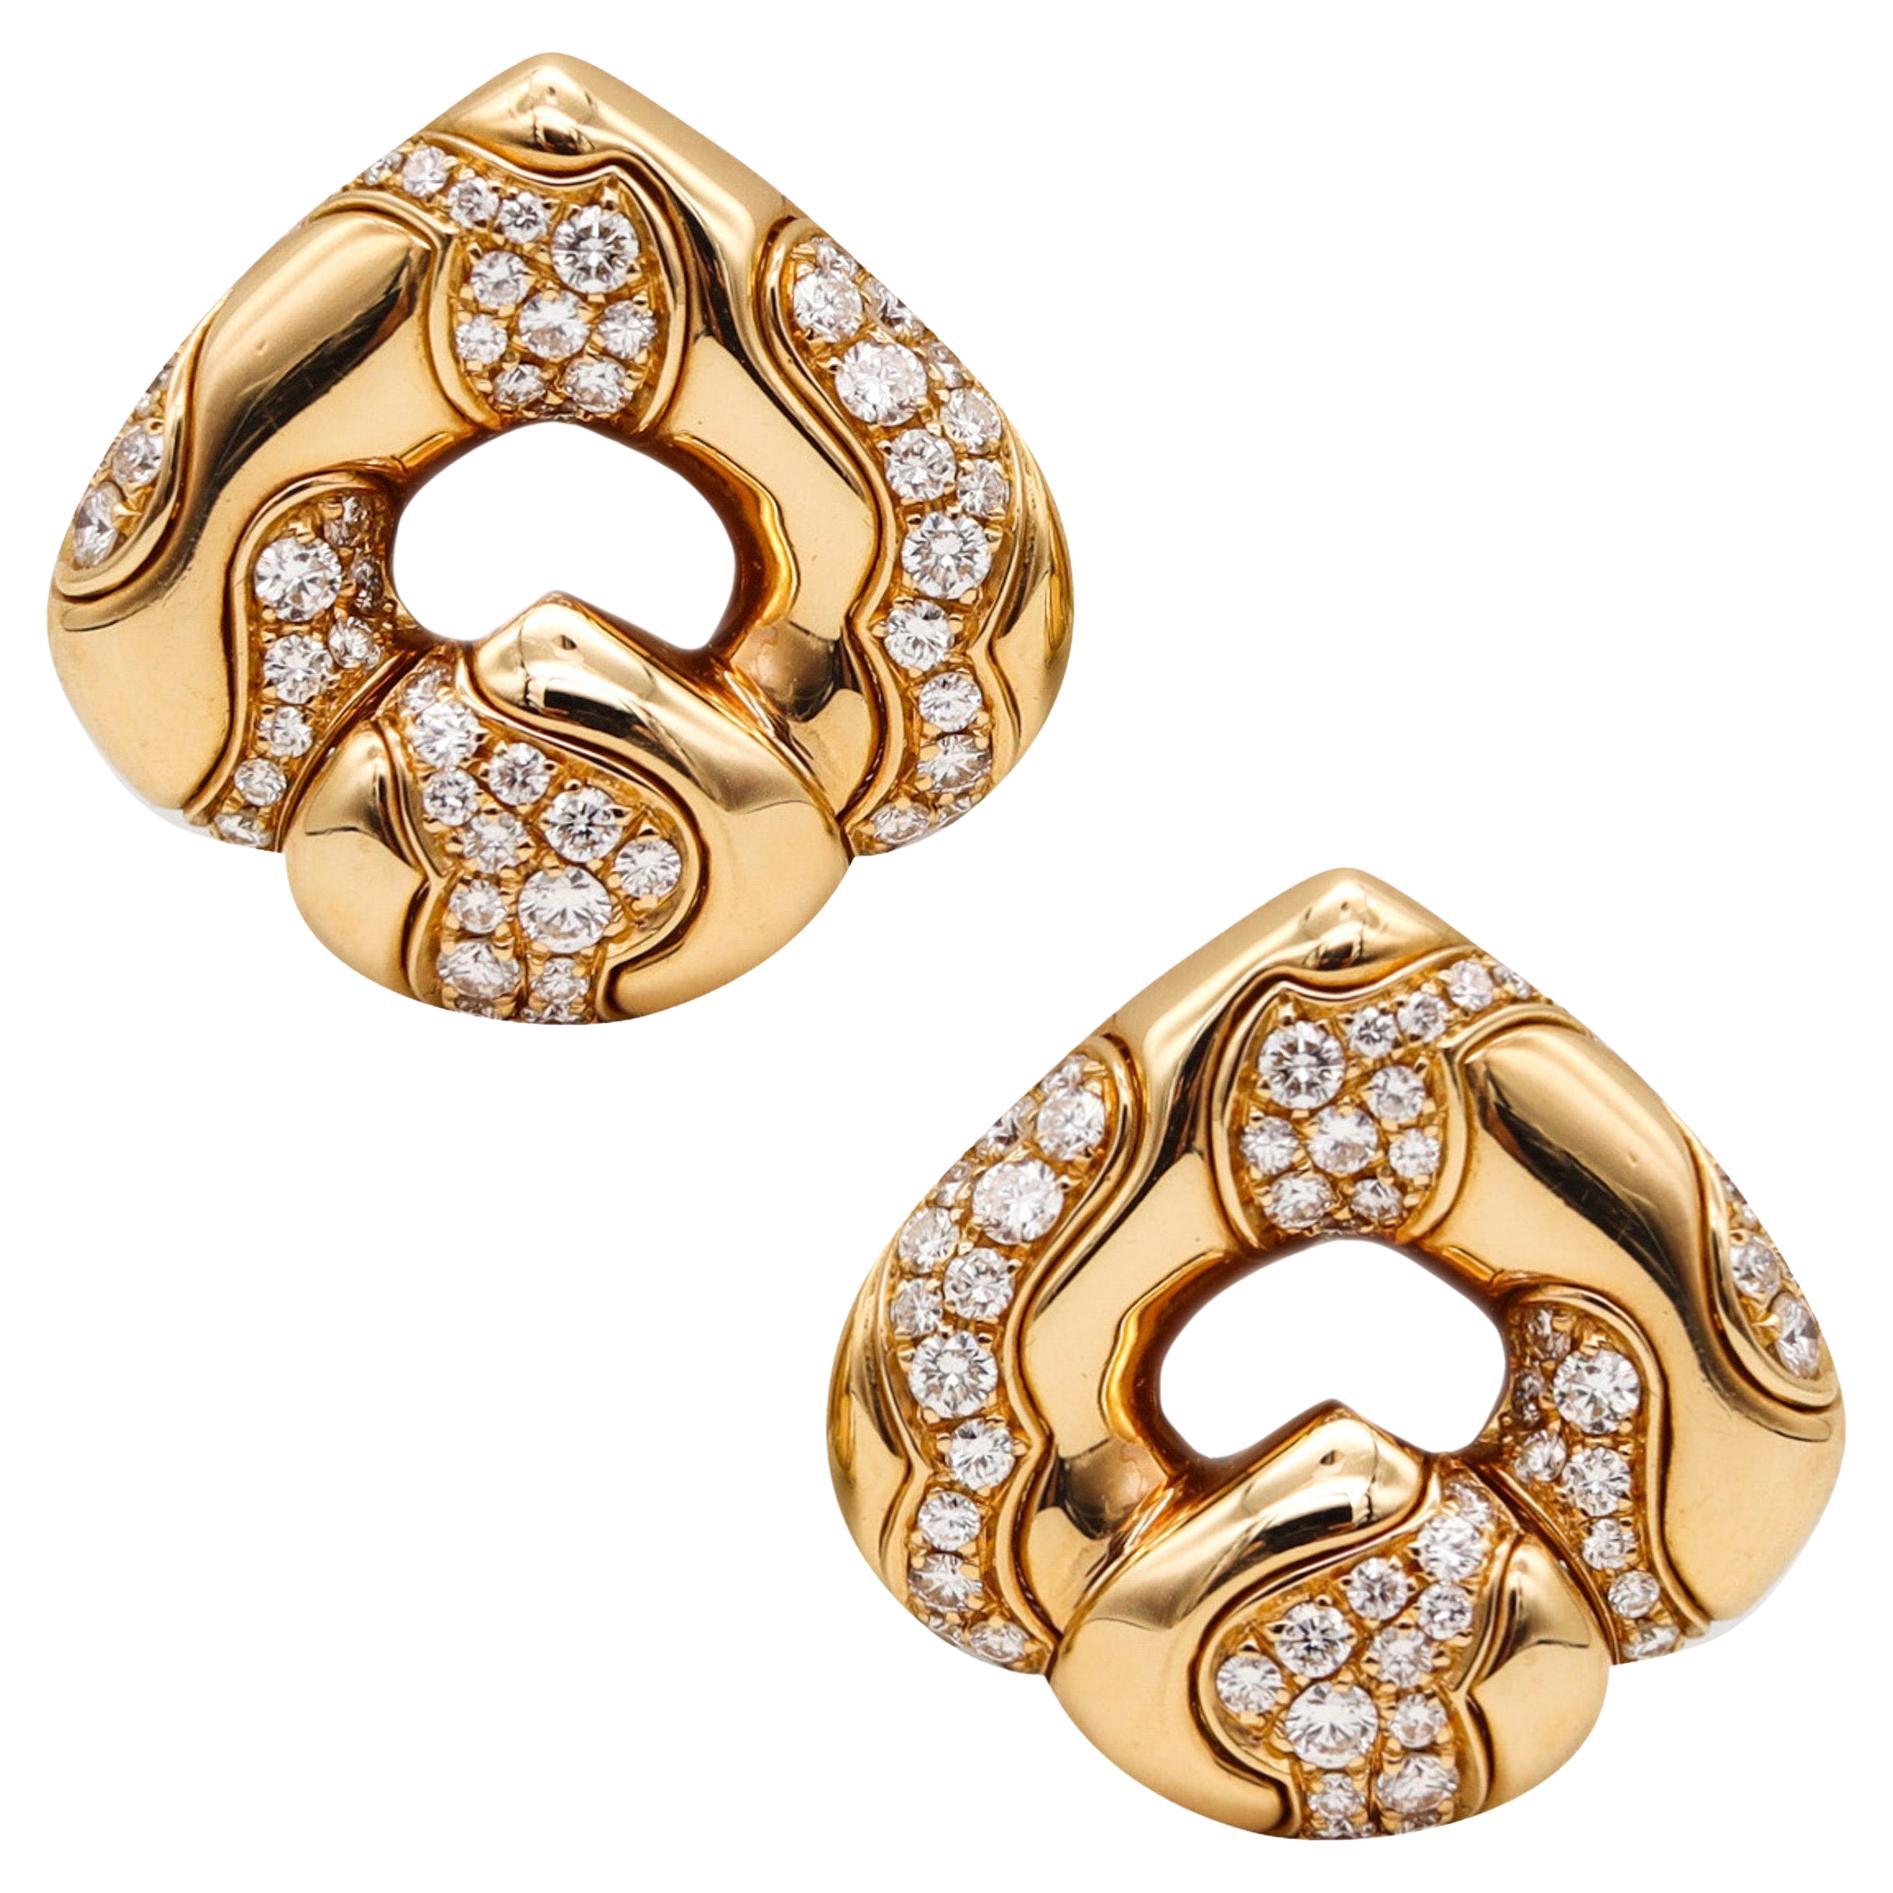 Marina Bvlgari 1987 Pardy Clips Earrings 18kt Yellow Gold with 4.84ctw Diamonds